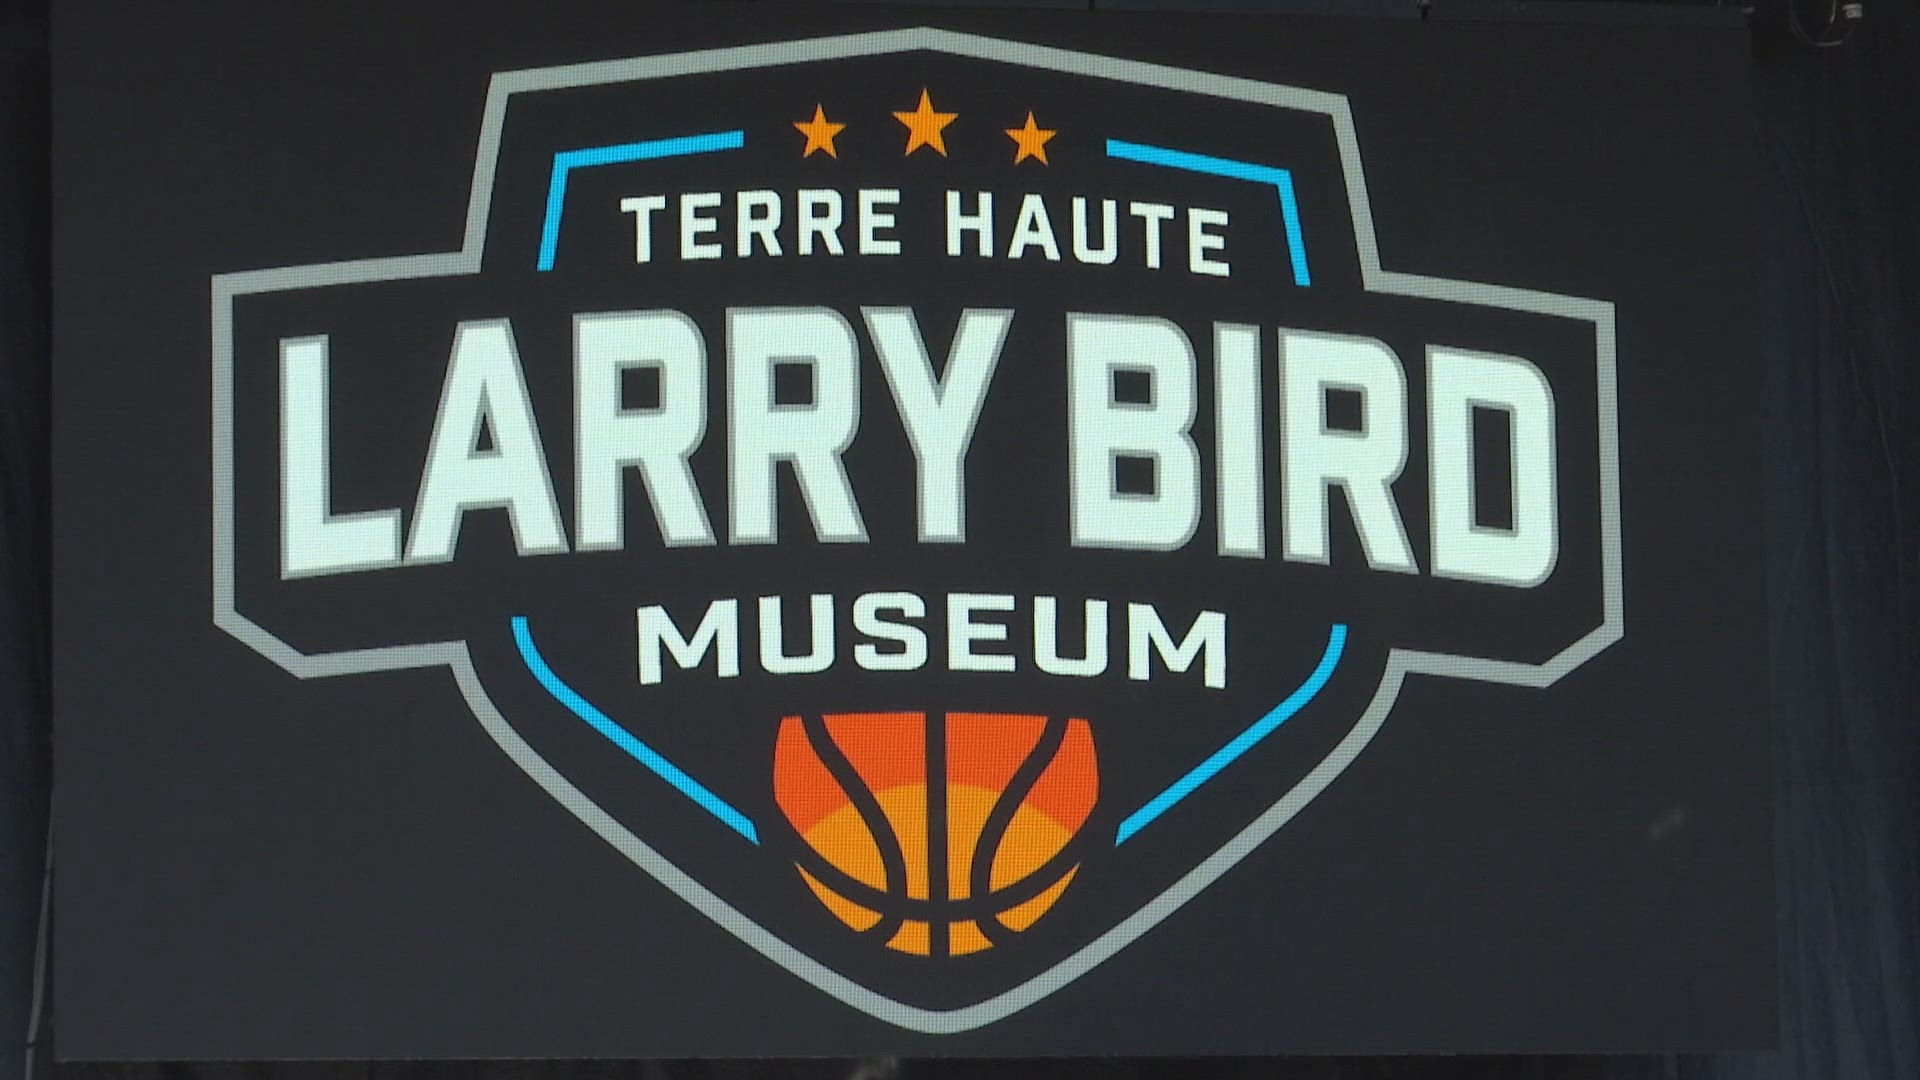 13News reporter Rich Nye reports from Terre Haute during the Larry Bird Museum opening ceremony.